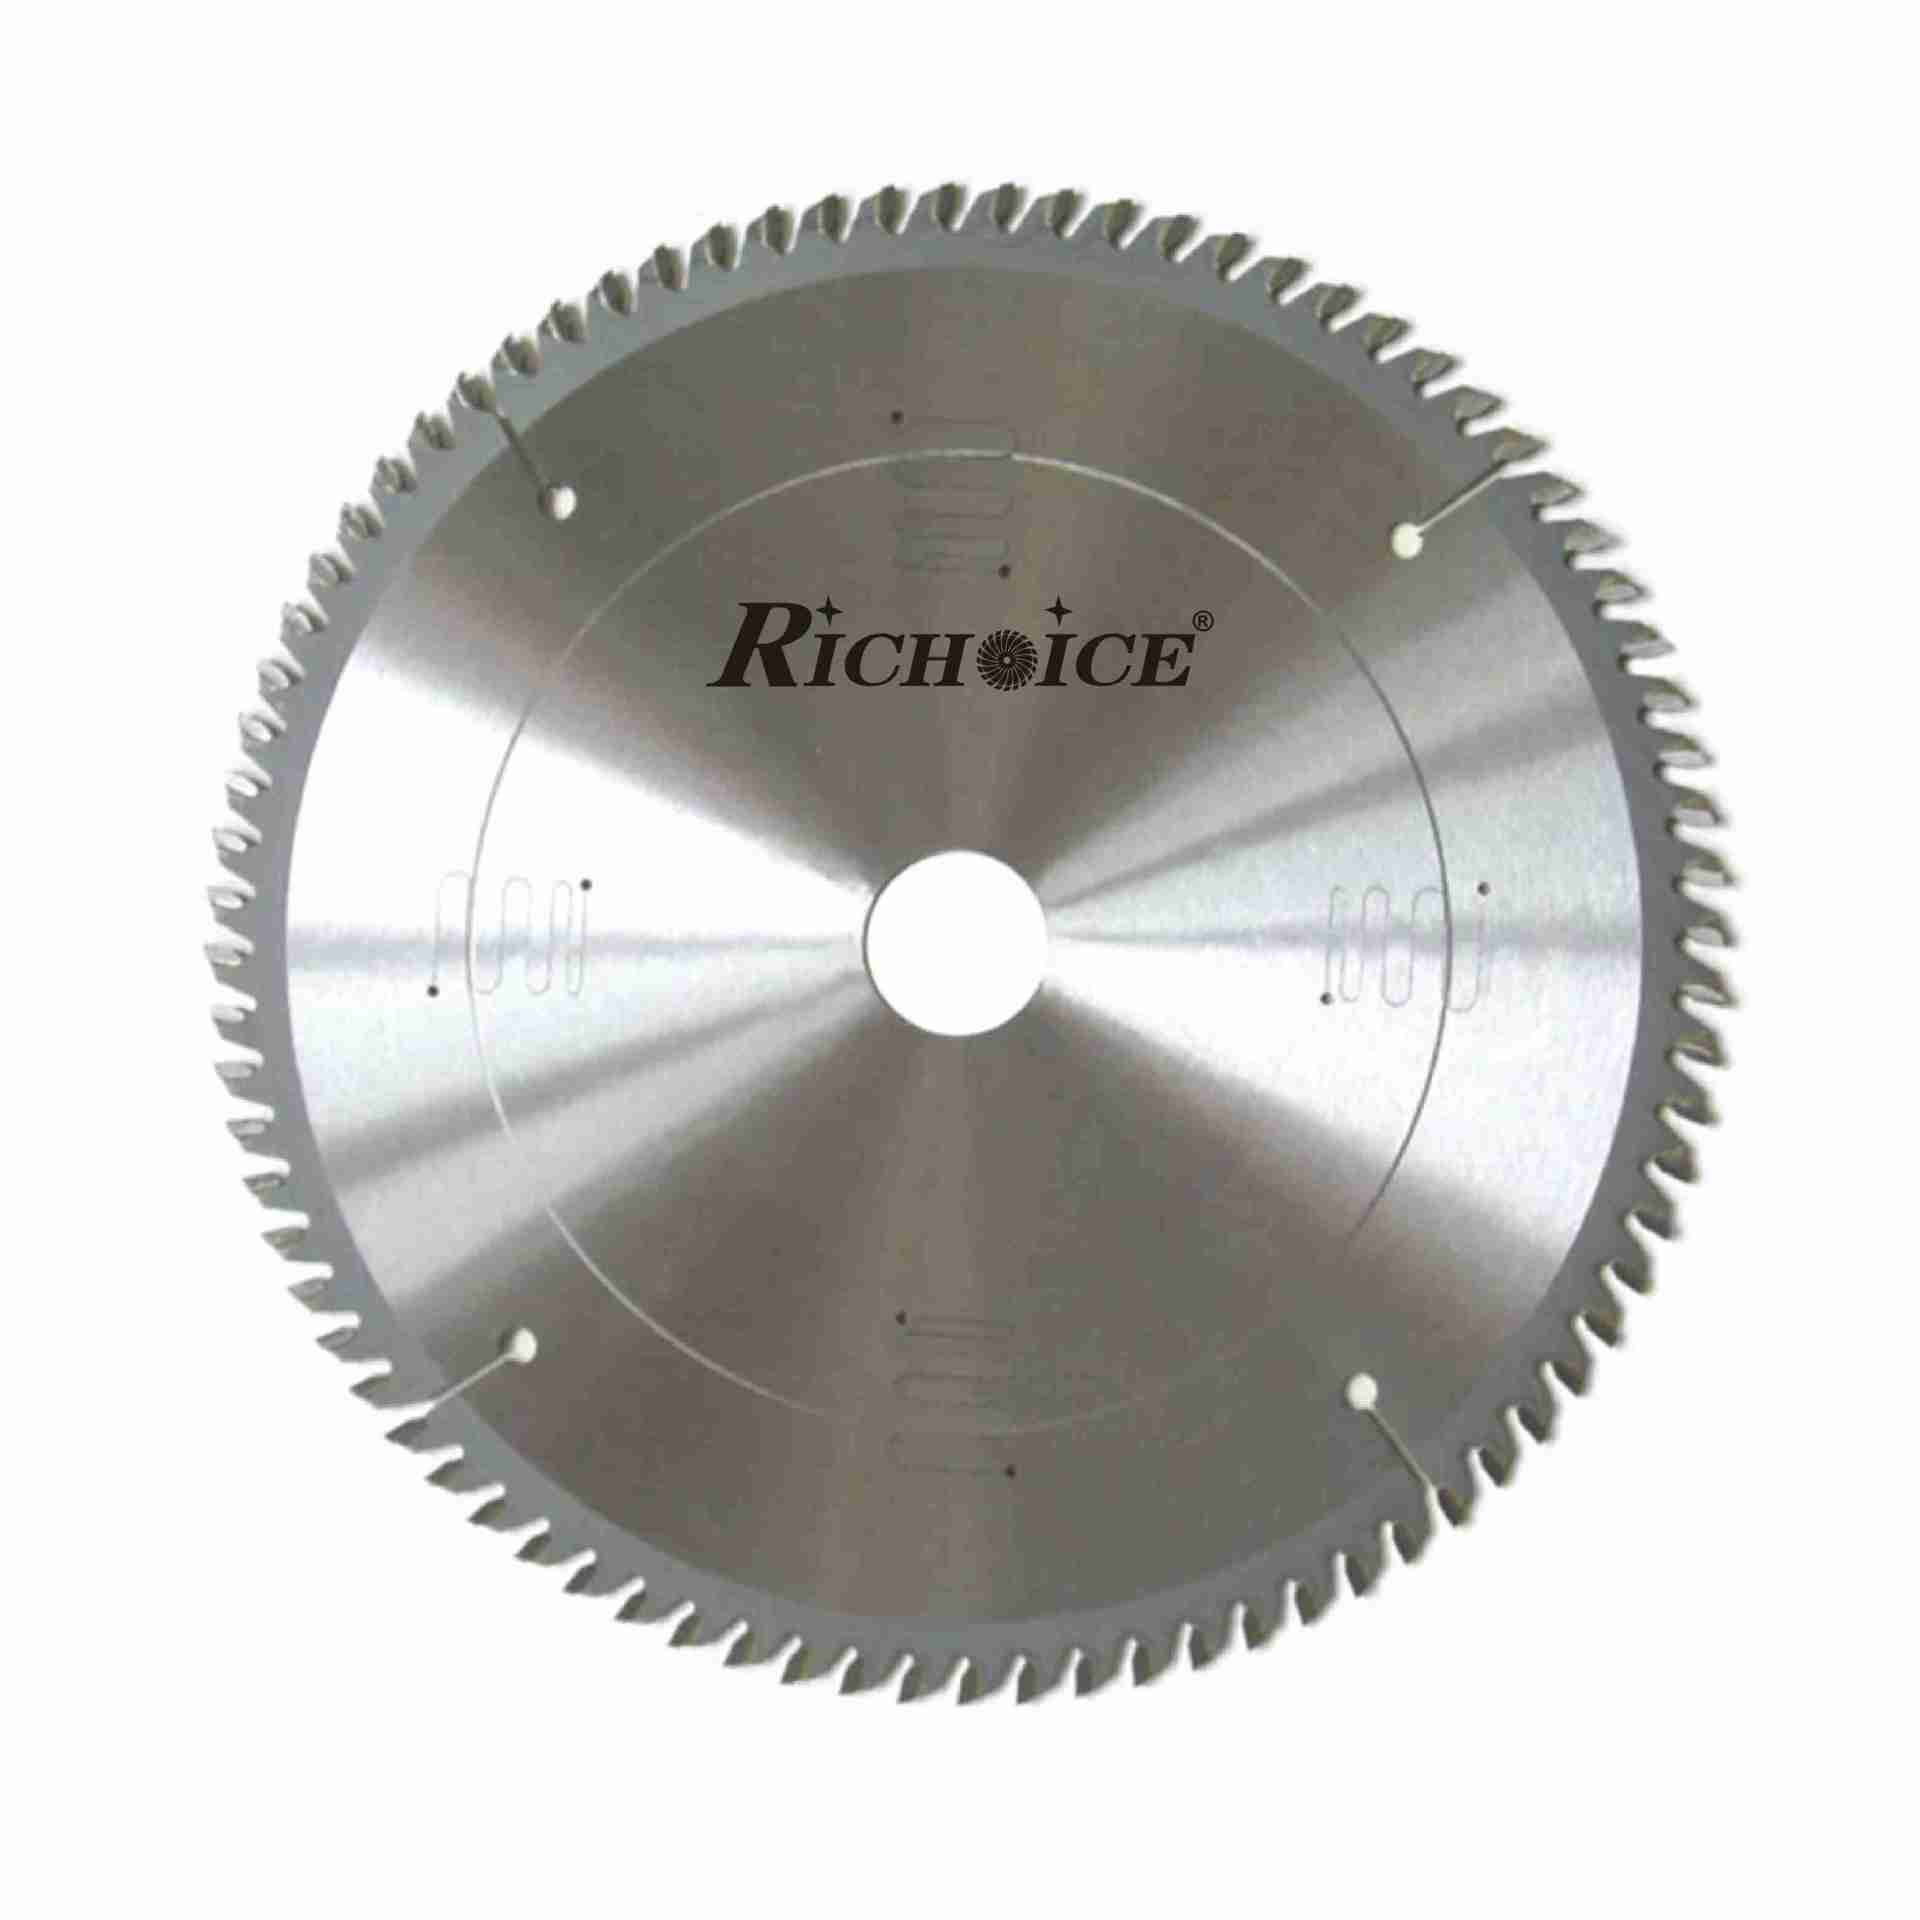 Professional Cross and Ripping Cutting Wood TCT Saw Blade Rip&Cross Cutting Saw Blade